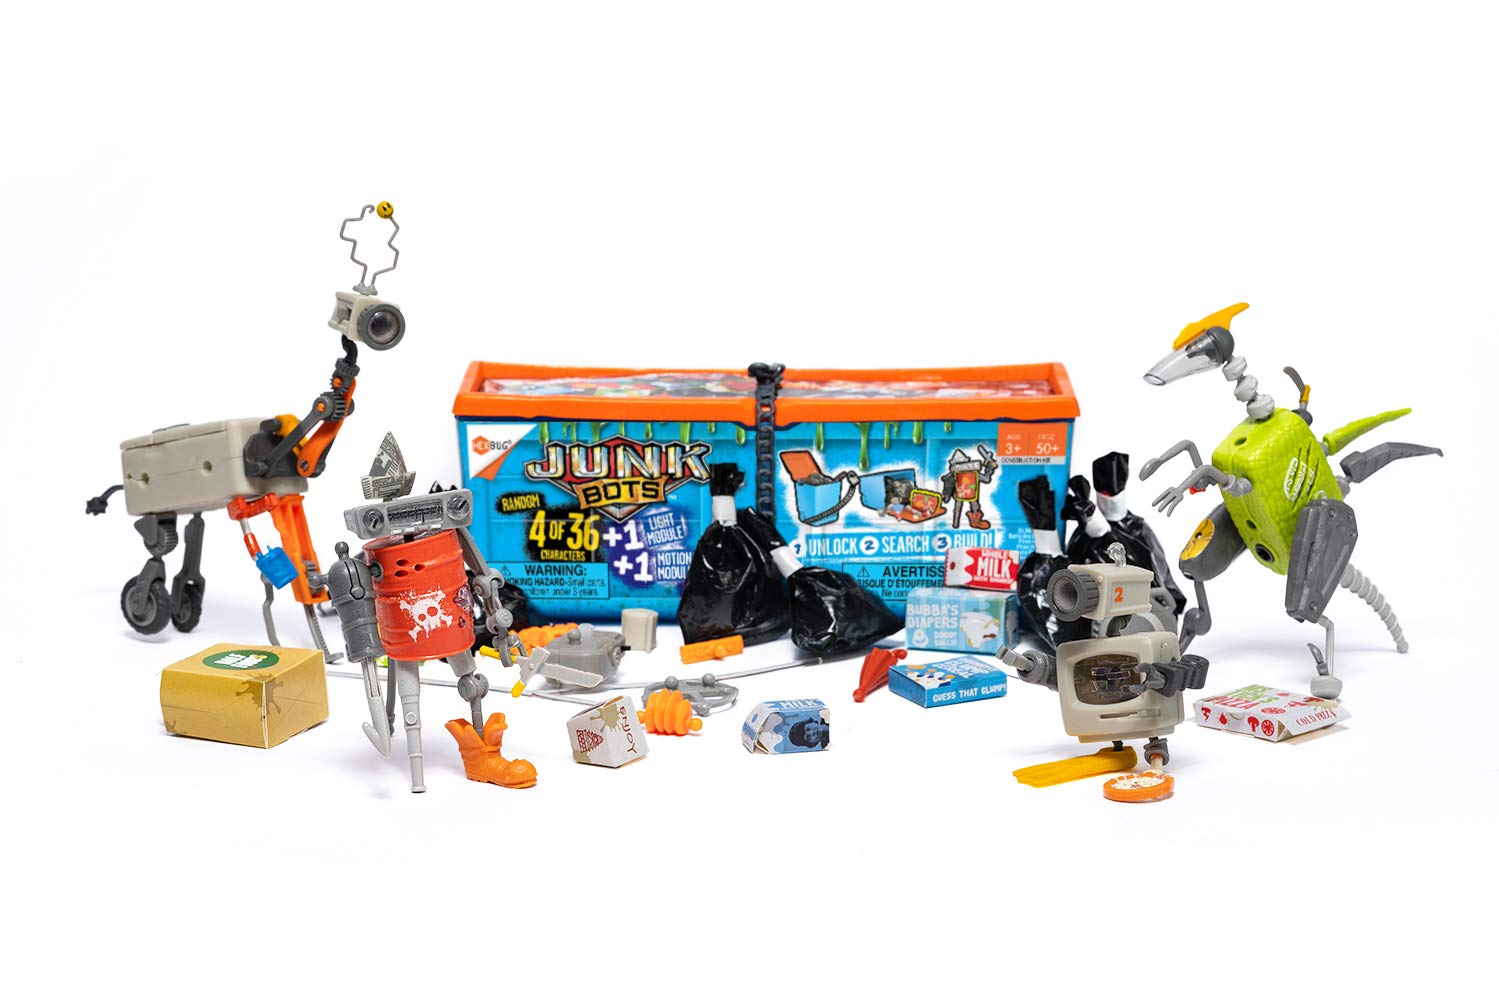 HEXBUG JUNKBOTS - Industrial Dumpster Assortment Kit - Surprise Toys in Every Box LOL with Boys and Girls - Alien Powered Toys for Kids - 50+ Pieces of Action Construction Figures - for Ages 5 and Up